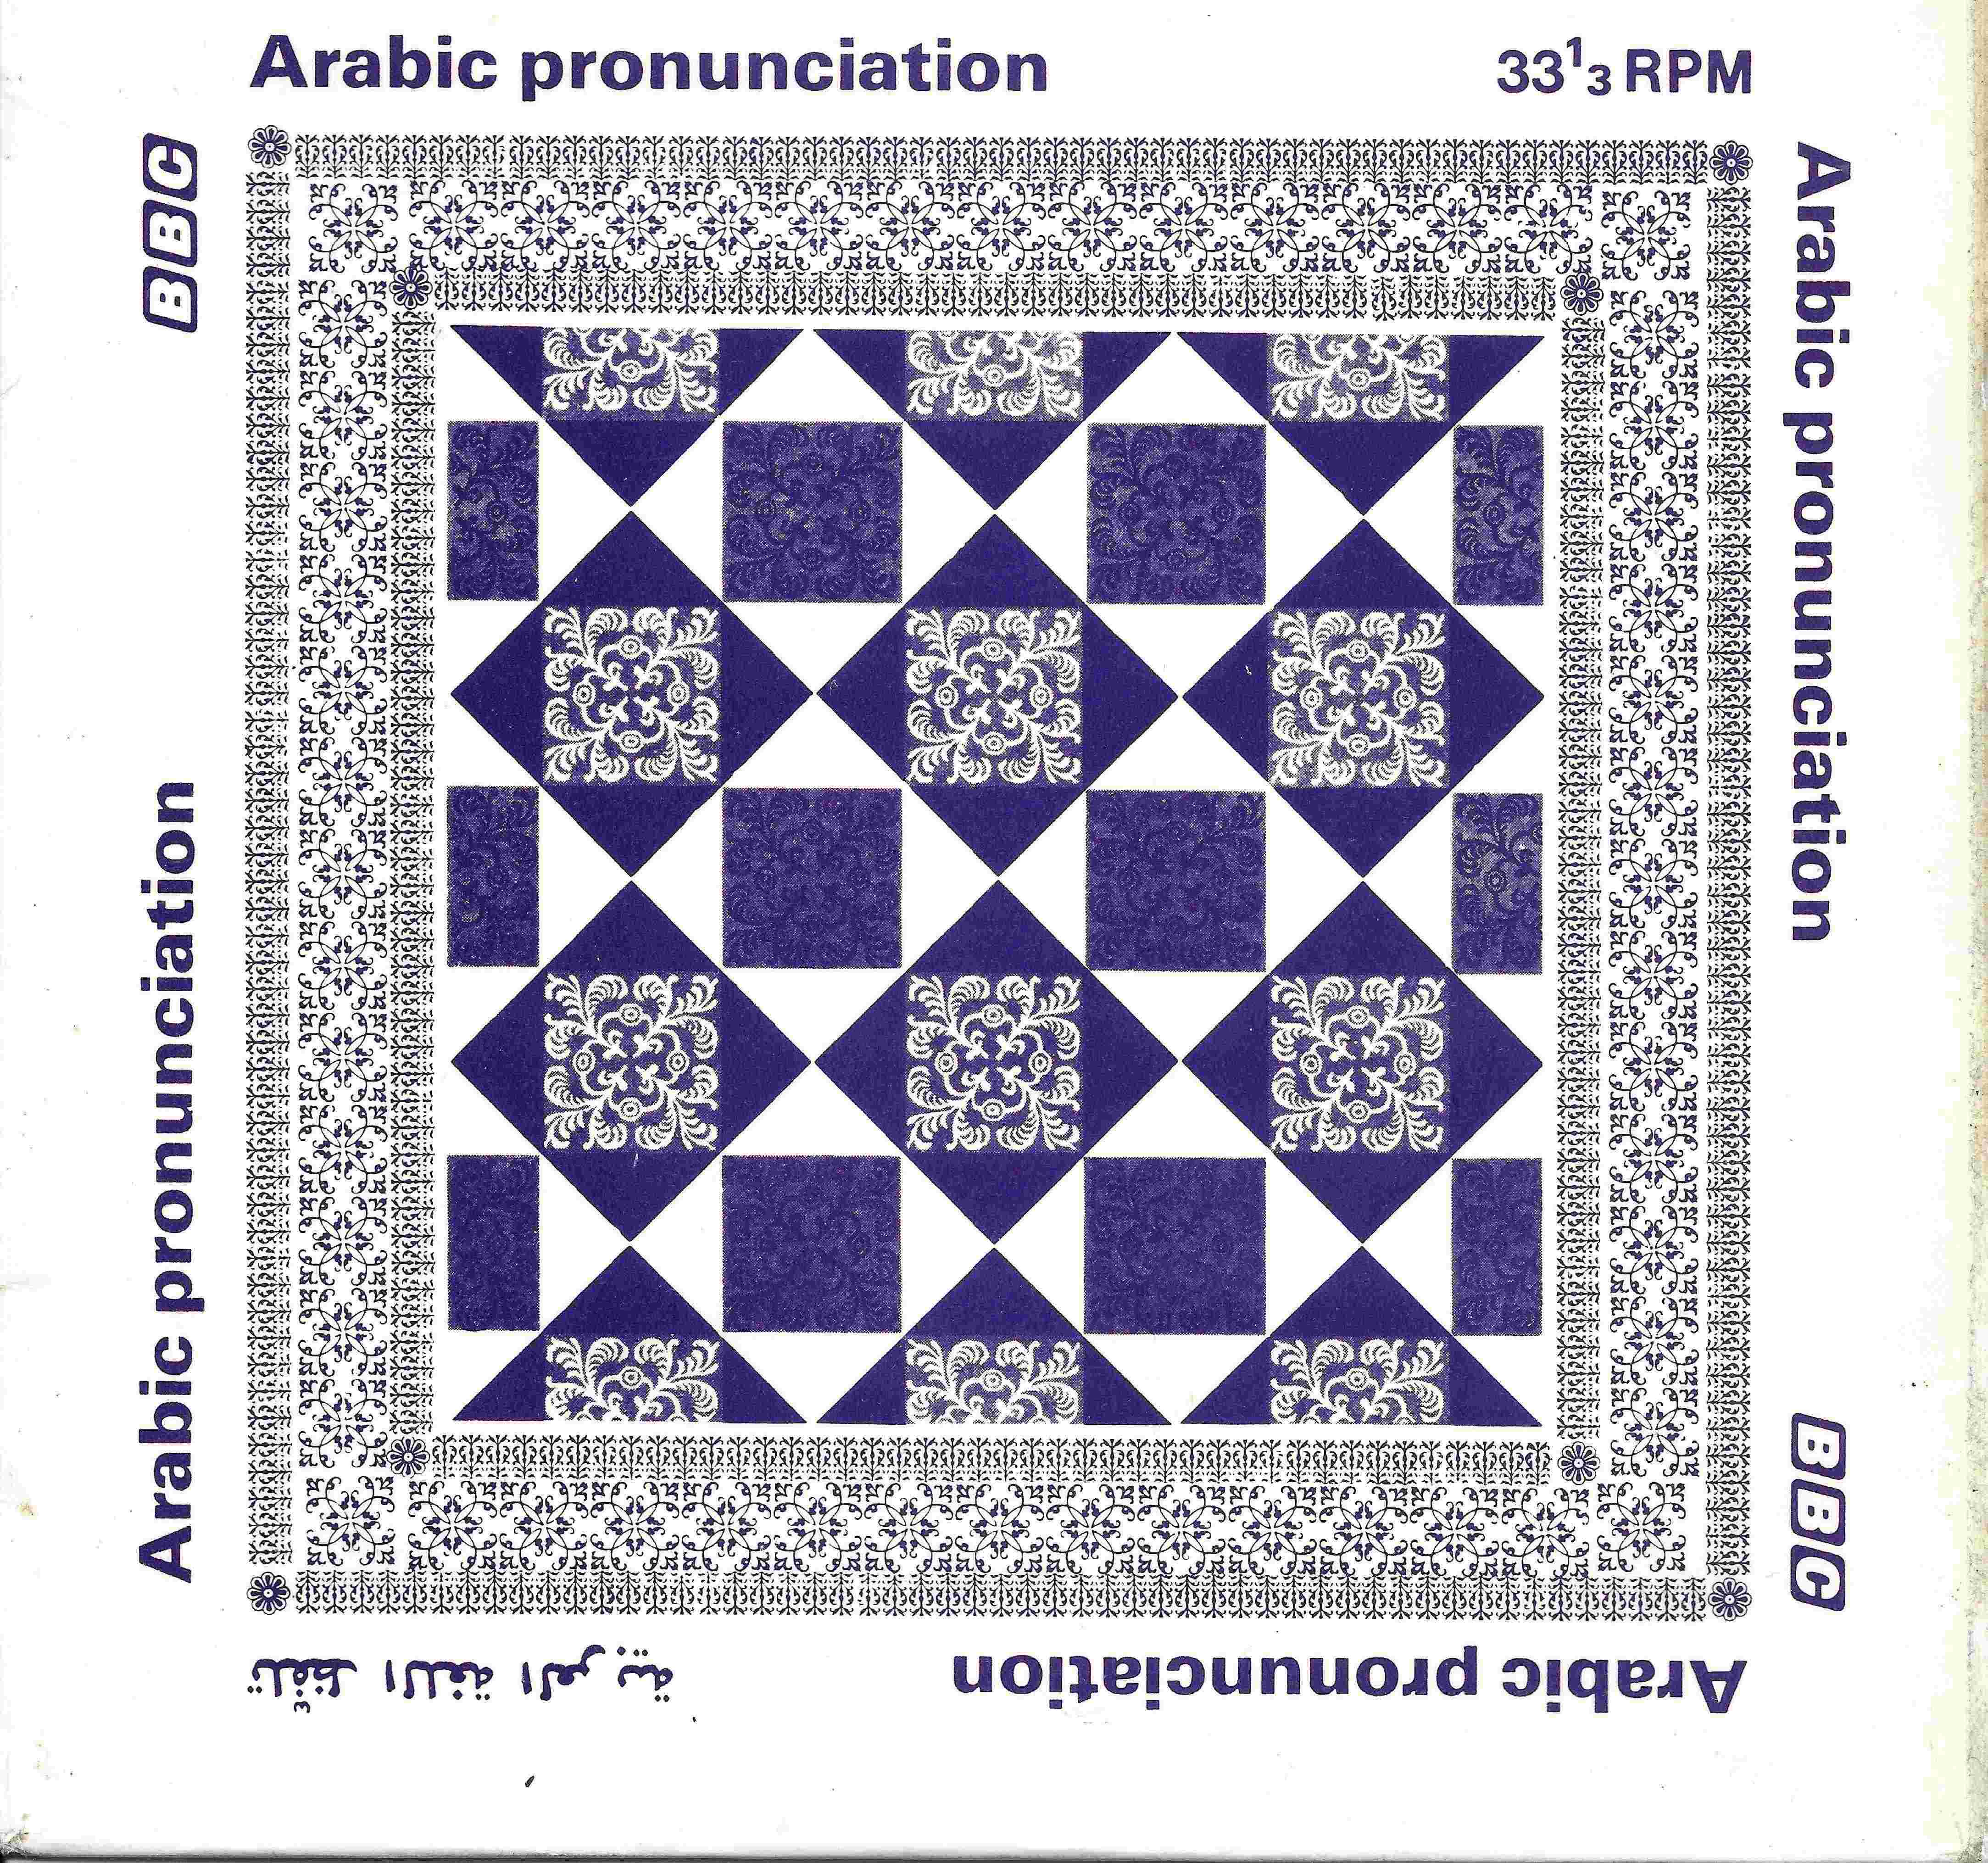 Picture of OP 171/172 Arabic pronunciation by artist T. F. Mitchell from the BBC singles - Records and Tapes library